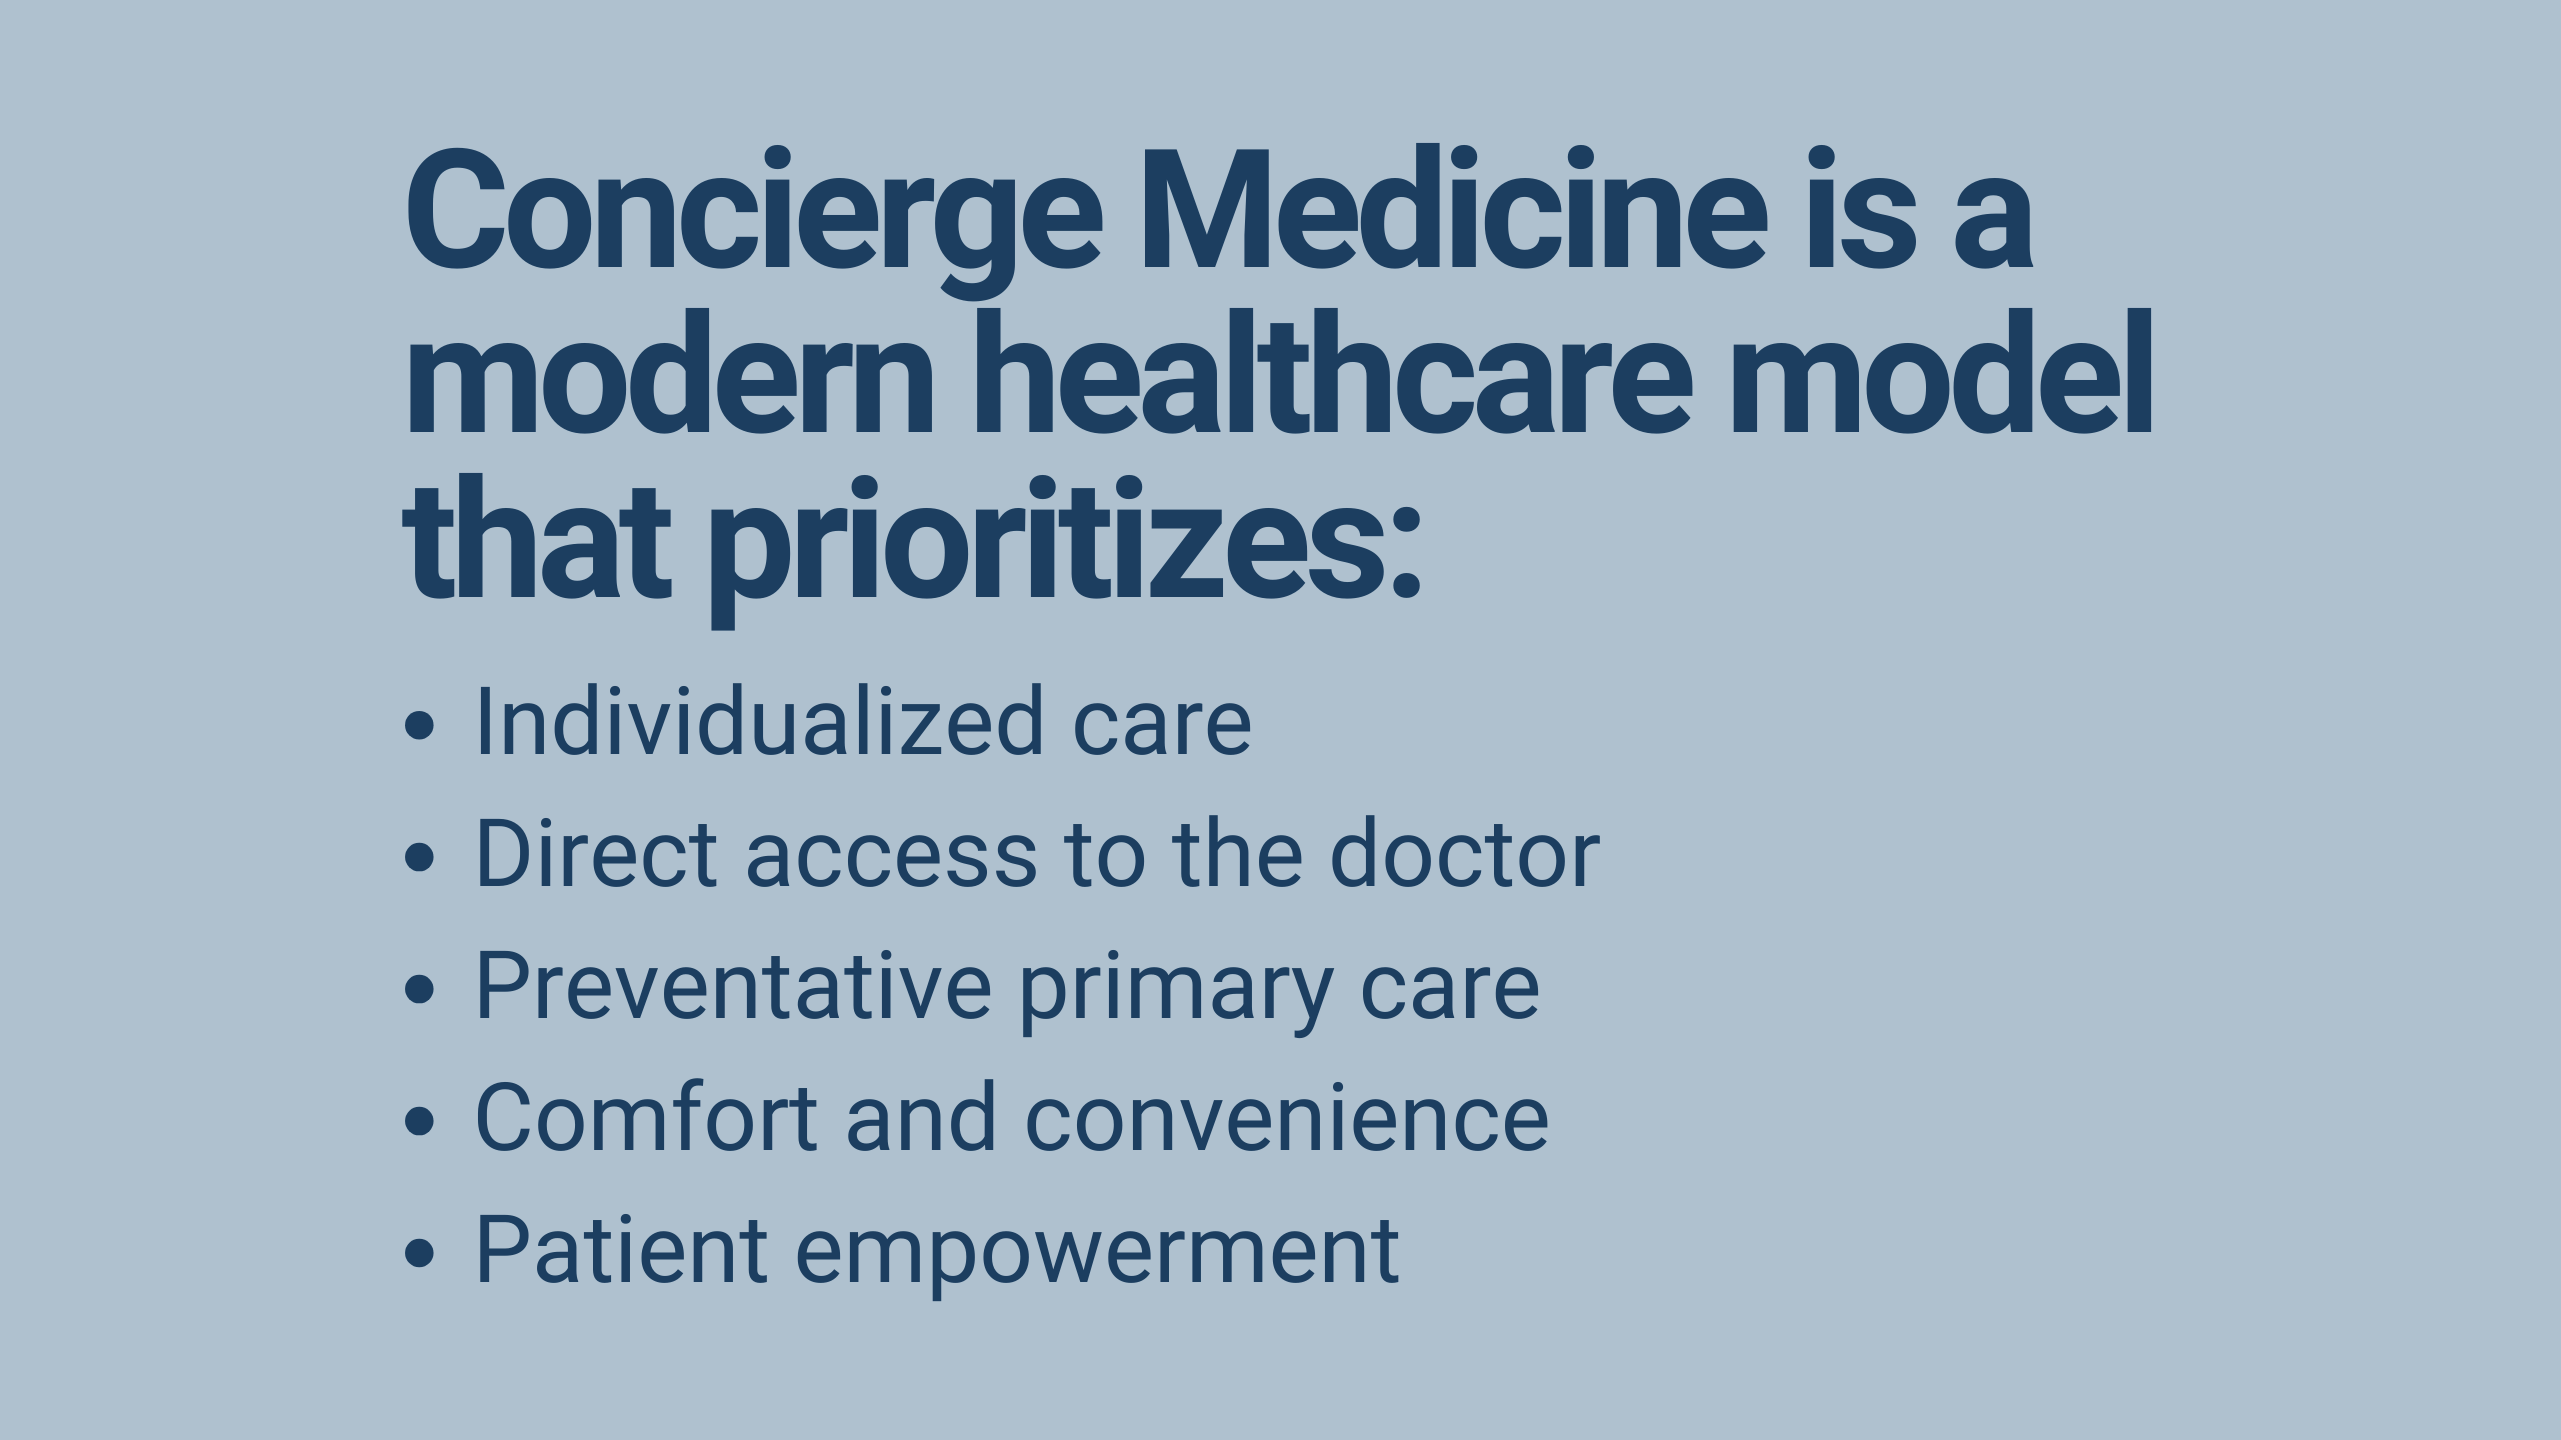 Concierge Medicine: Individualized Care, Direct Access to the Doctor, Preventative Primary Care, Comfort and Convenience, Patient Empowerment